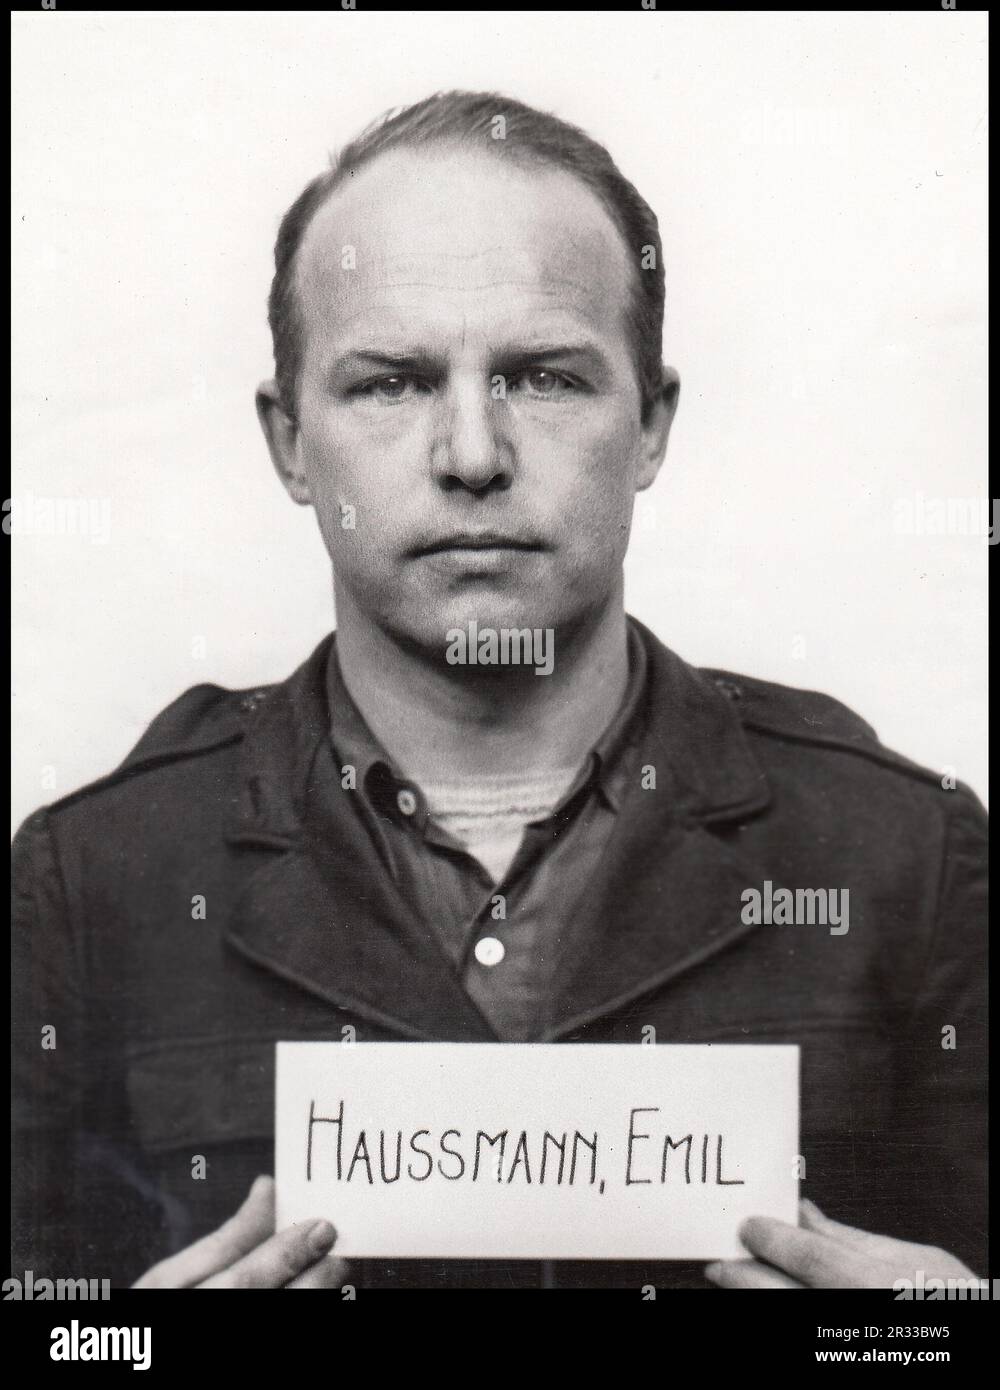 NUREMBERG TRIALS 1947 Emil Haussmann was a German SS functionary during the Nazi era. He was part of Einsatzkommando 12 of Einsatzgruppe D, which perpetrated the Holocaust in occupied Ukraine. Haussmann was charged with crimes against humanity in 1947 in the Einsatzgruppen Trial. Two days after his indictment, Haussmann committed suicide.  Born: 11 October 1910, Ravensburg, Germany Died: 31 July 1947, Nuremberg, Germany Stock Photo